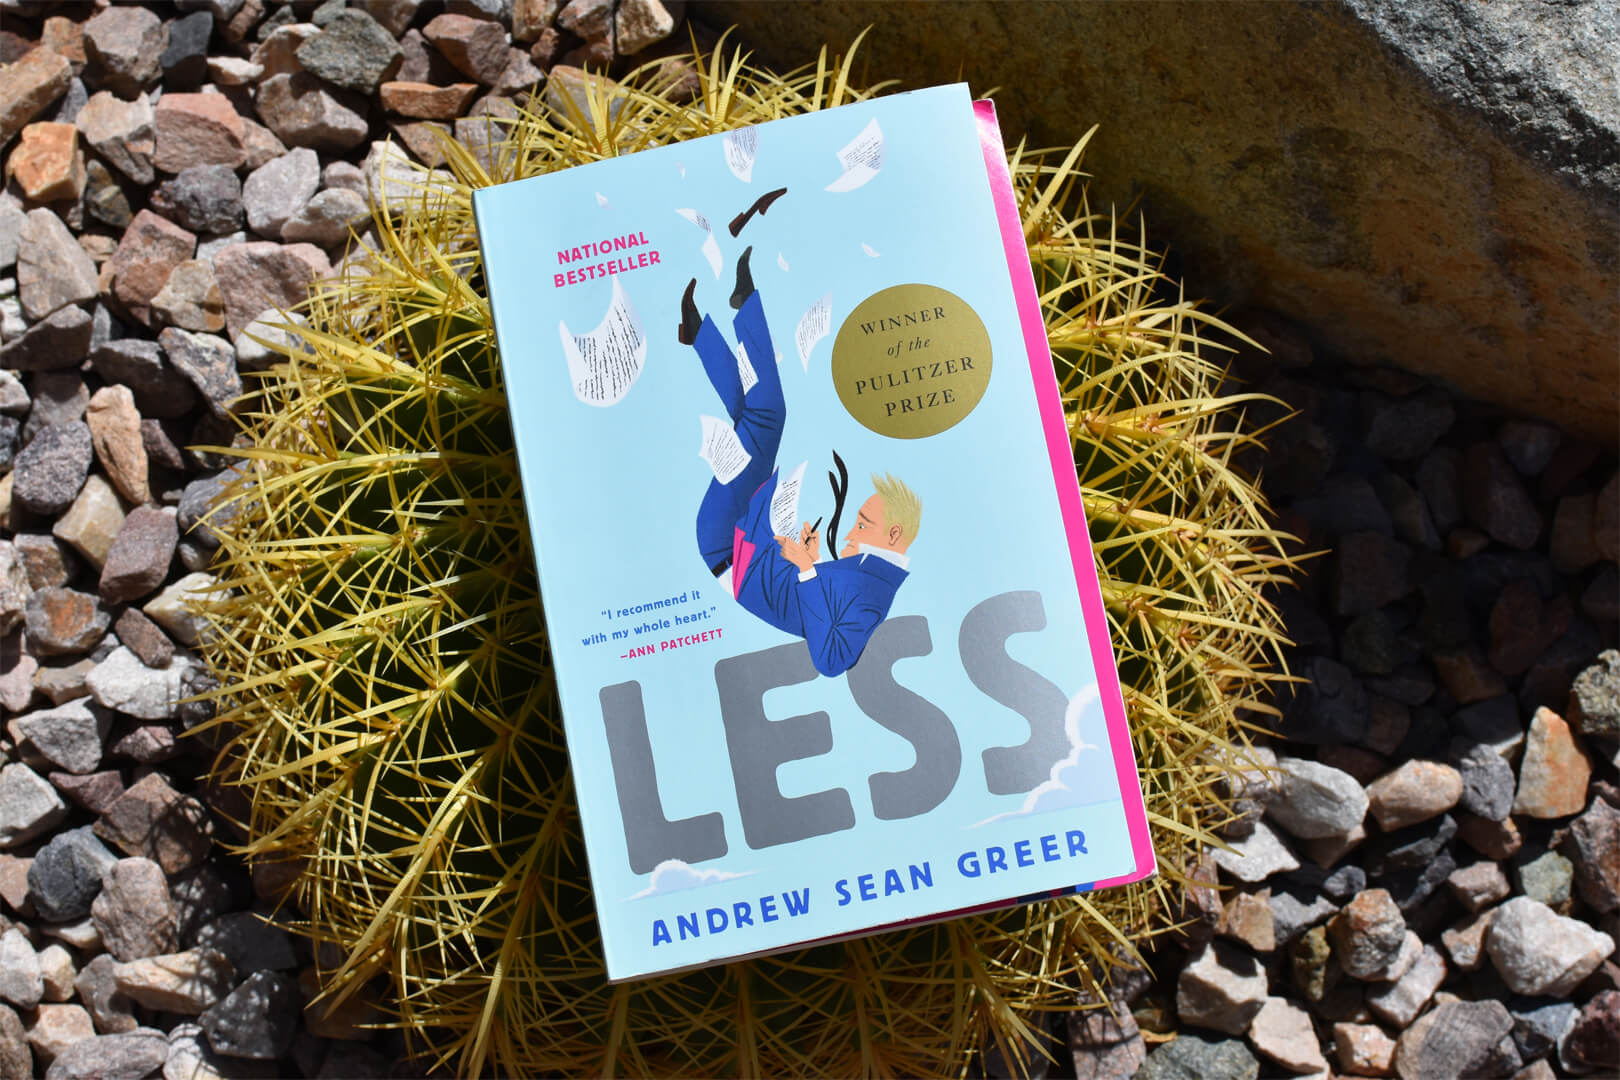 Preview: Less by Andrew Sean Greer